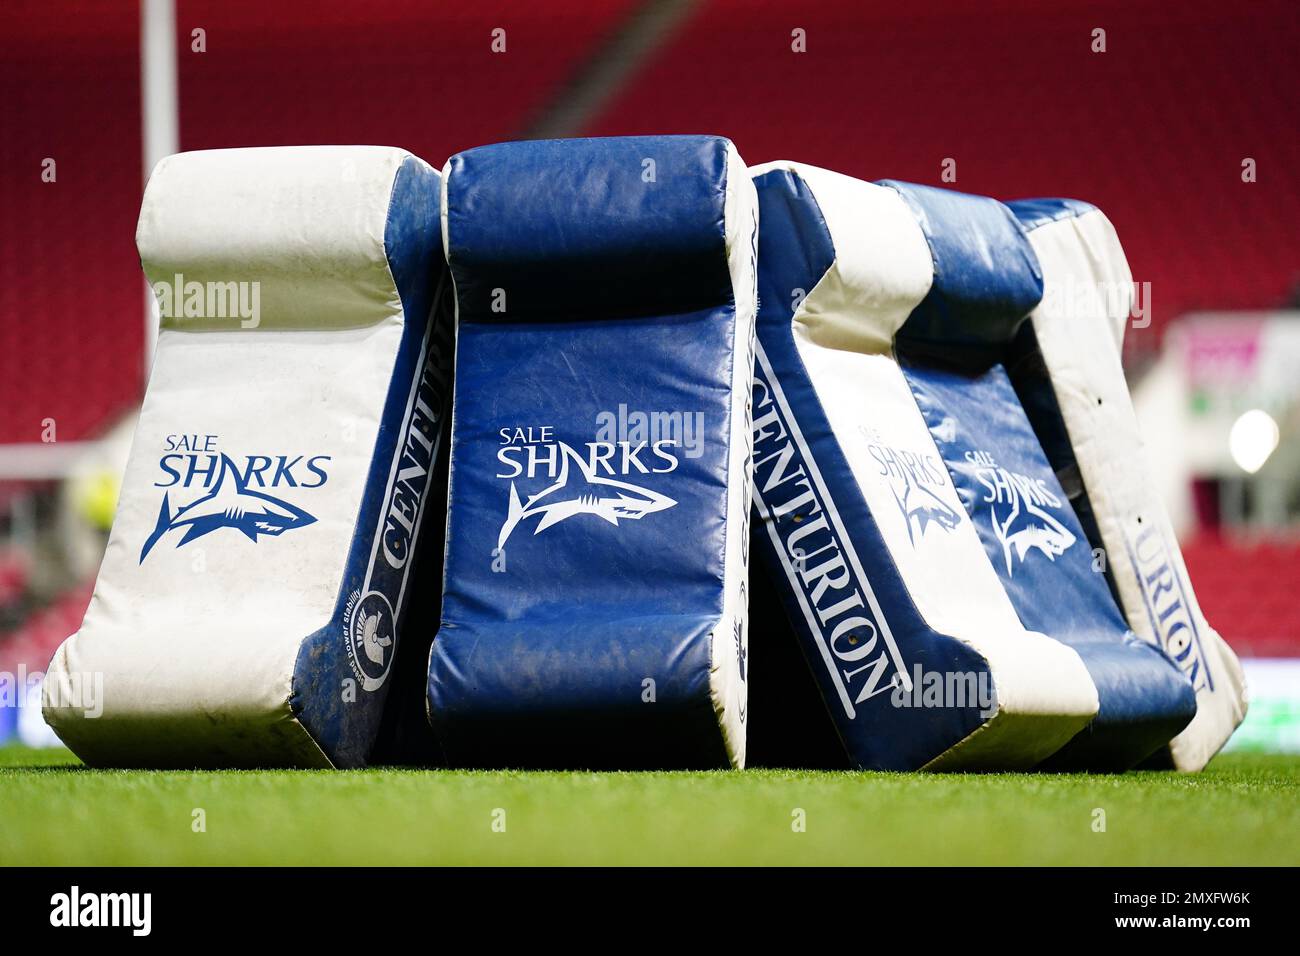 https://c8.alamy.com/comp/2MXFW6K/a-general-view-of-sale-sharks-branded-tackle-pads-prior-to-the-gallagher-premiership-match-at-ashton-gate-stadium-bristol-picture-date-friday-february-3-2023-2MXFW6K.jpg